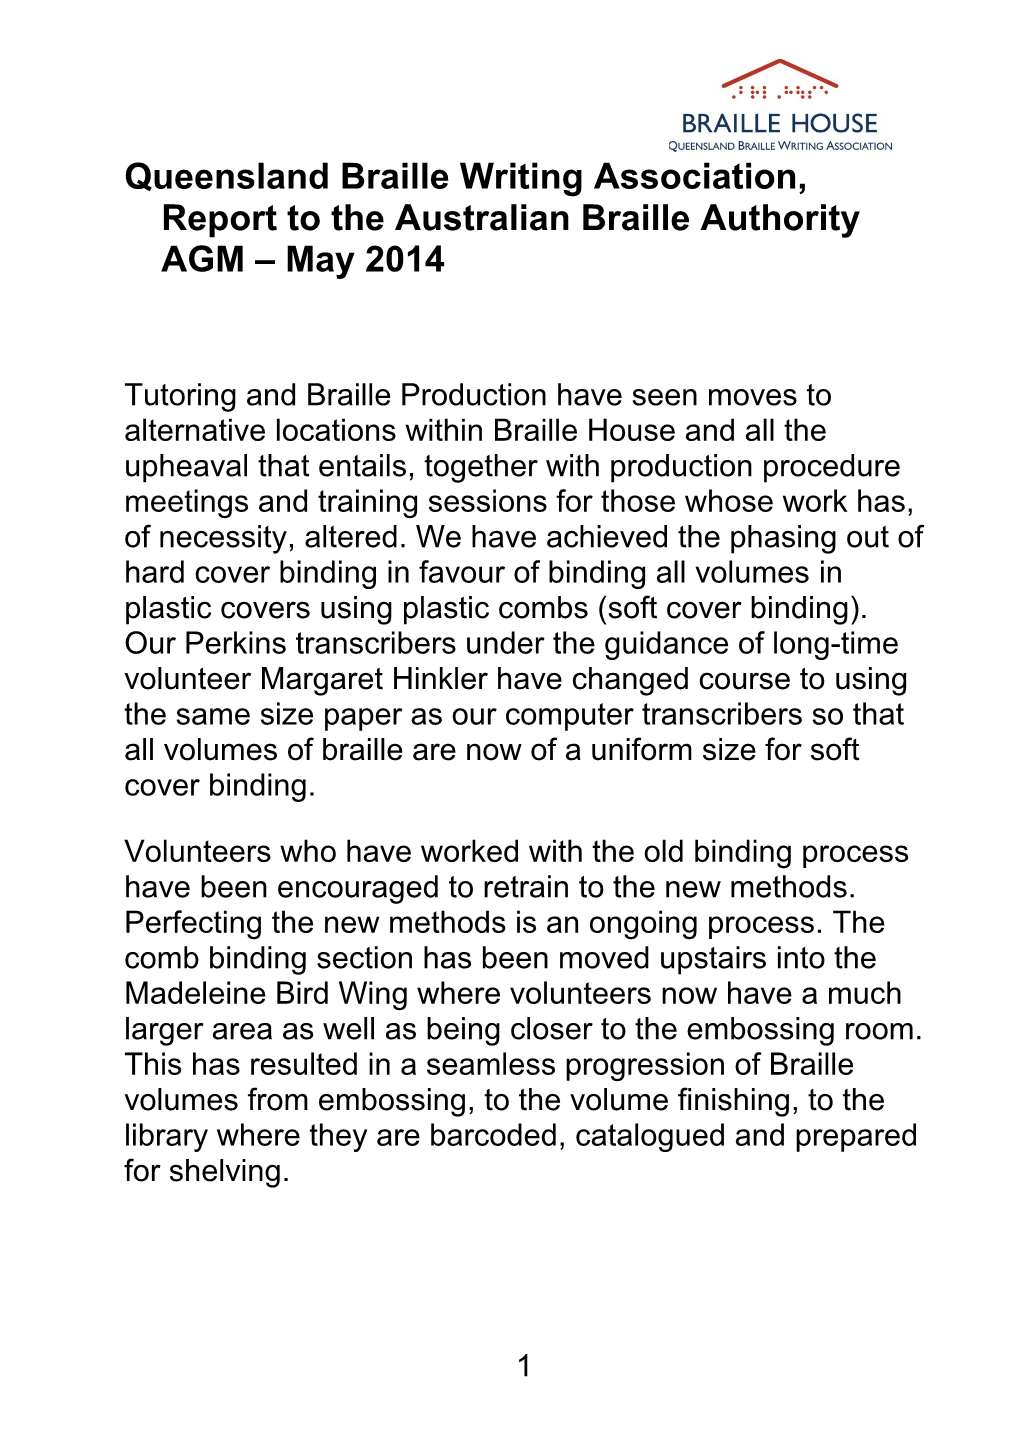 Queensland Braille Writing Association, Report to the Australian Braille Authority AGM May 2014